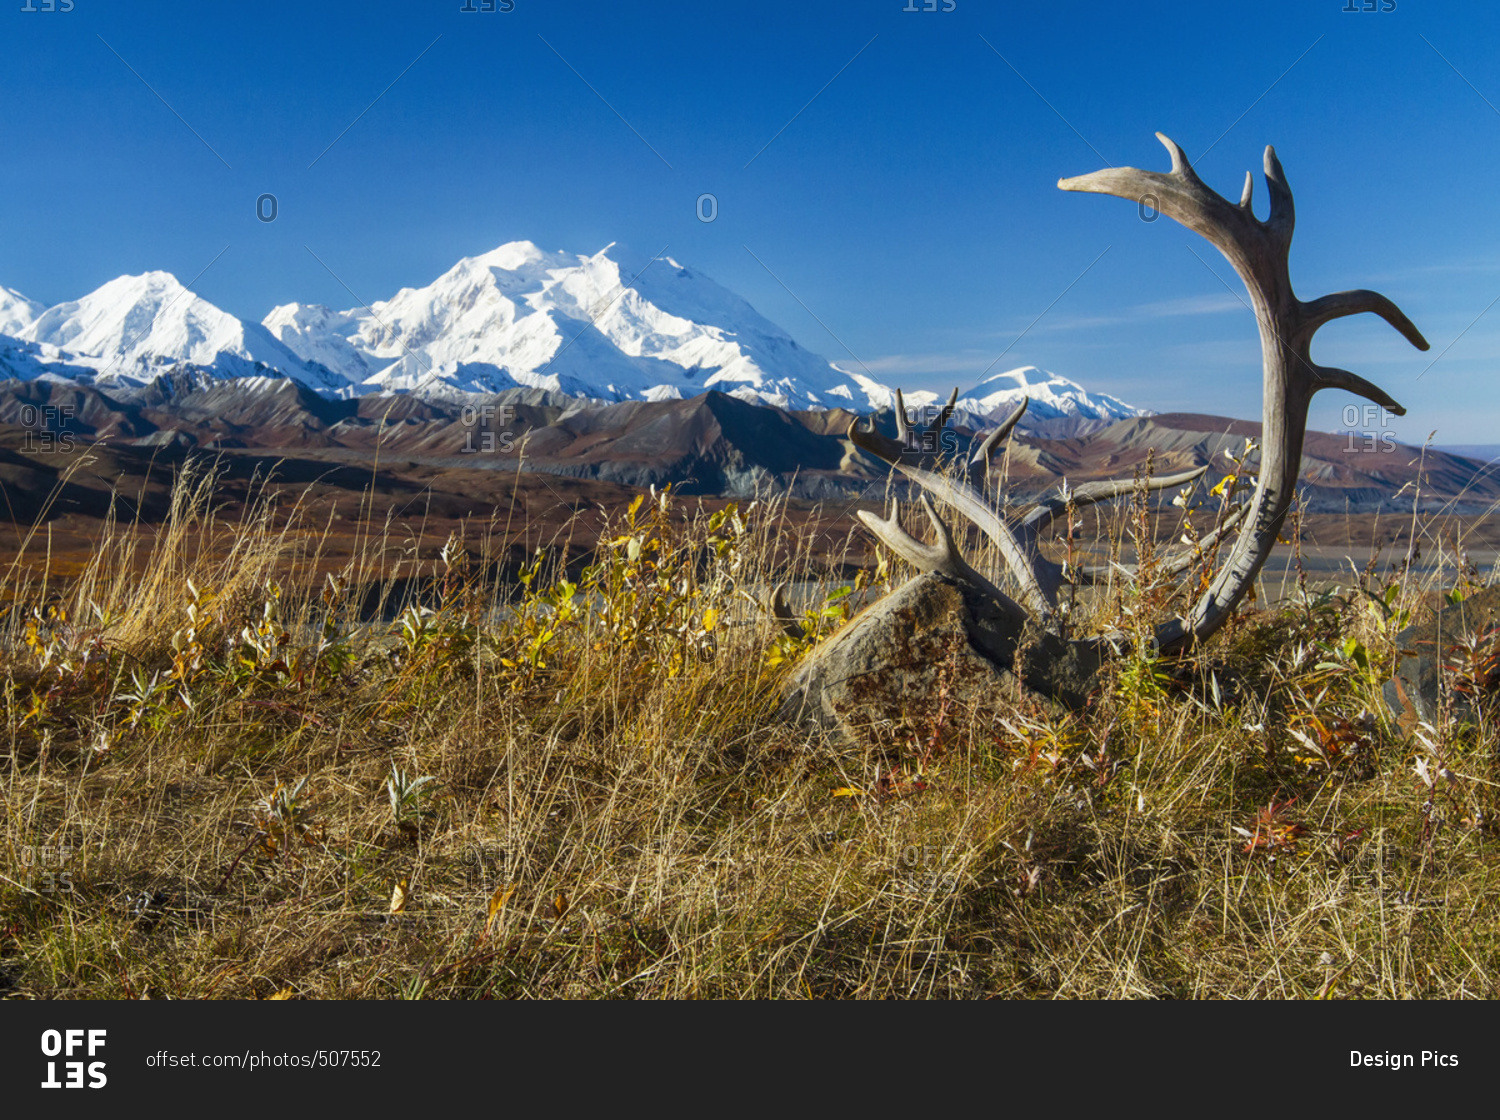 A set of caribou antlers lay in the foreground with Denali in background, Denali National Park and Preserve, interior Alaska in summertime; Alaska, United States of America